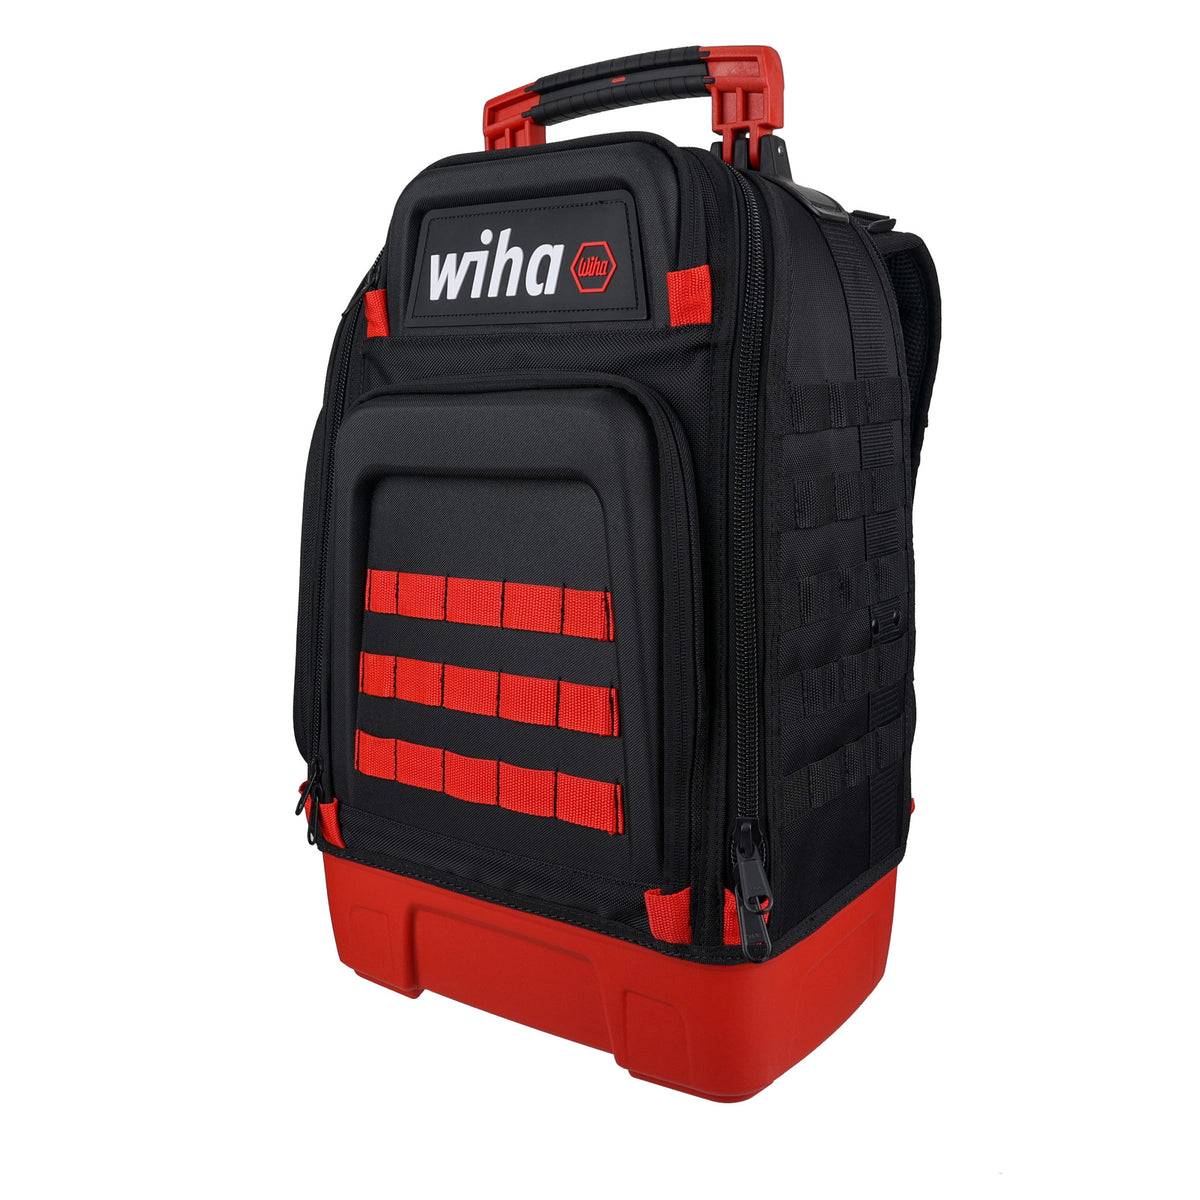 Tetra Electric - Wiha is definitely one of the best brands of hand tools  that you can have, I have been using their tools for more than 8 years  without any complaints